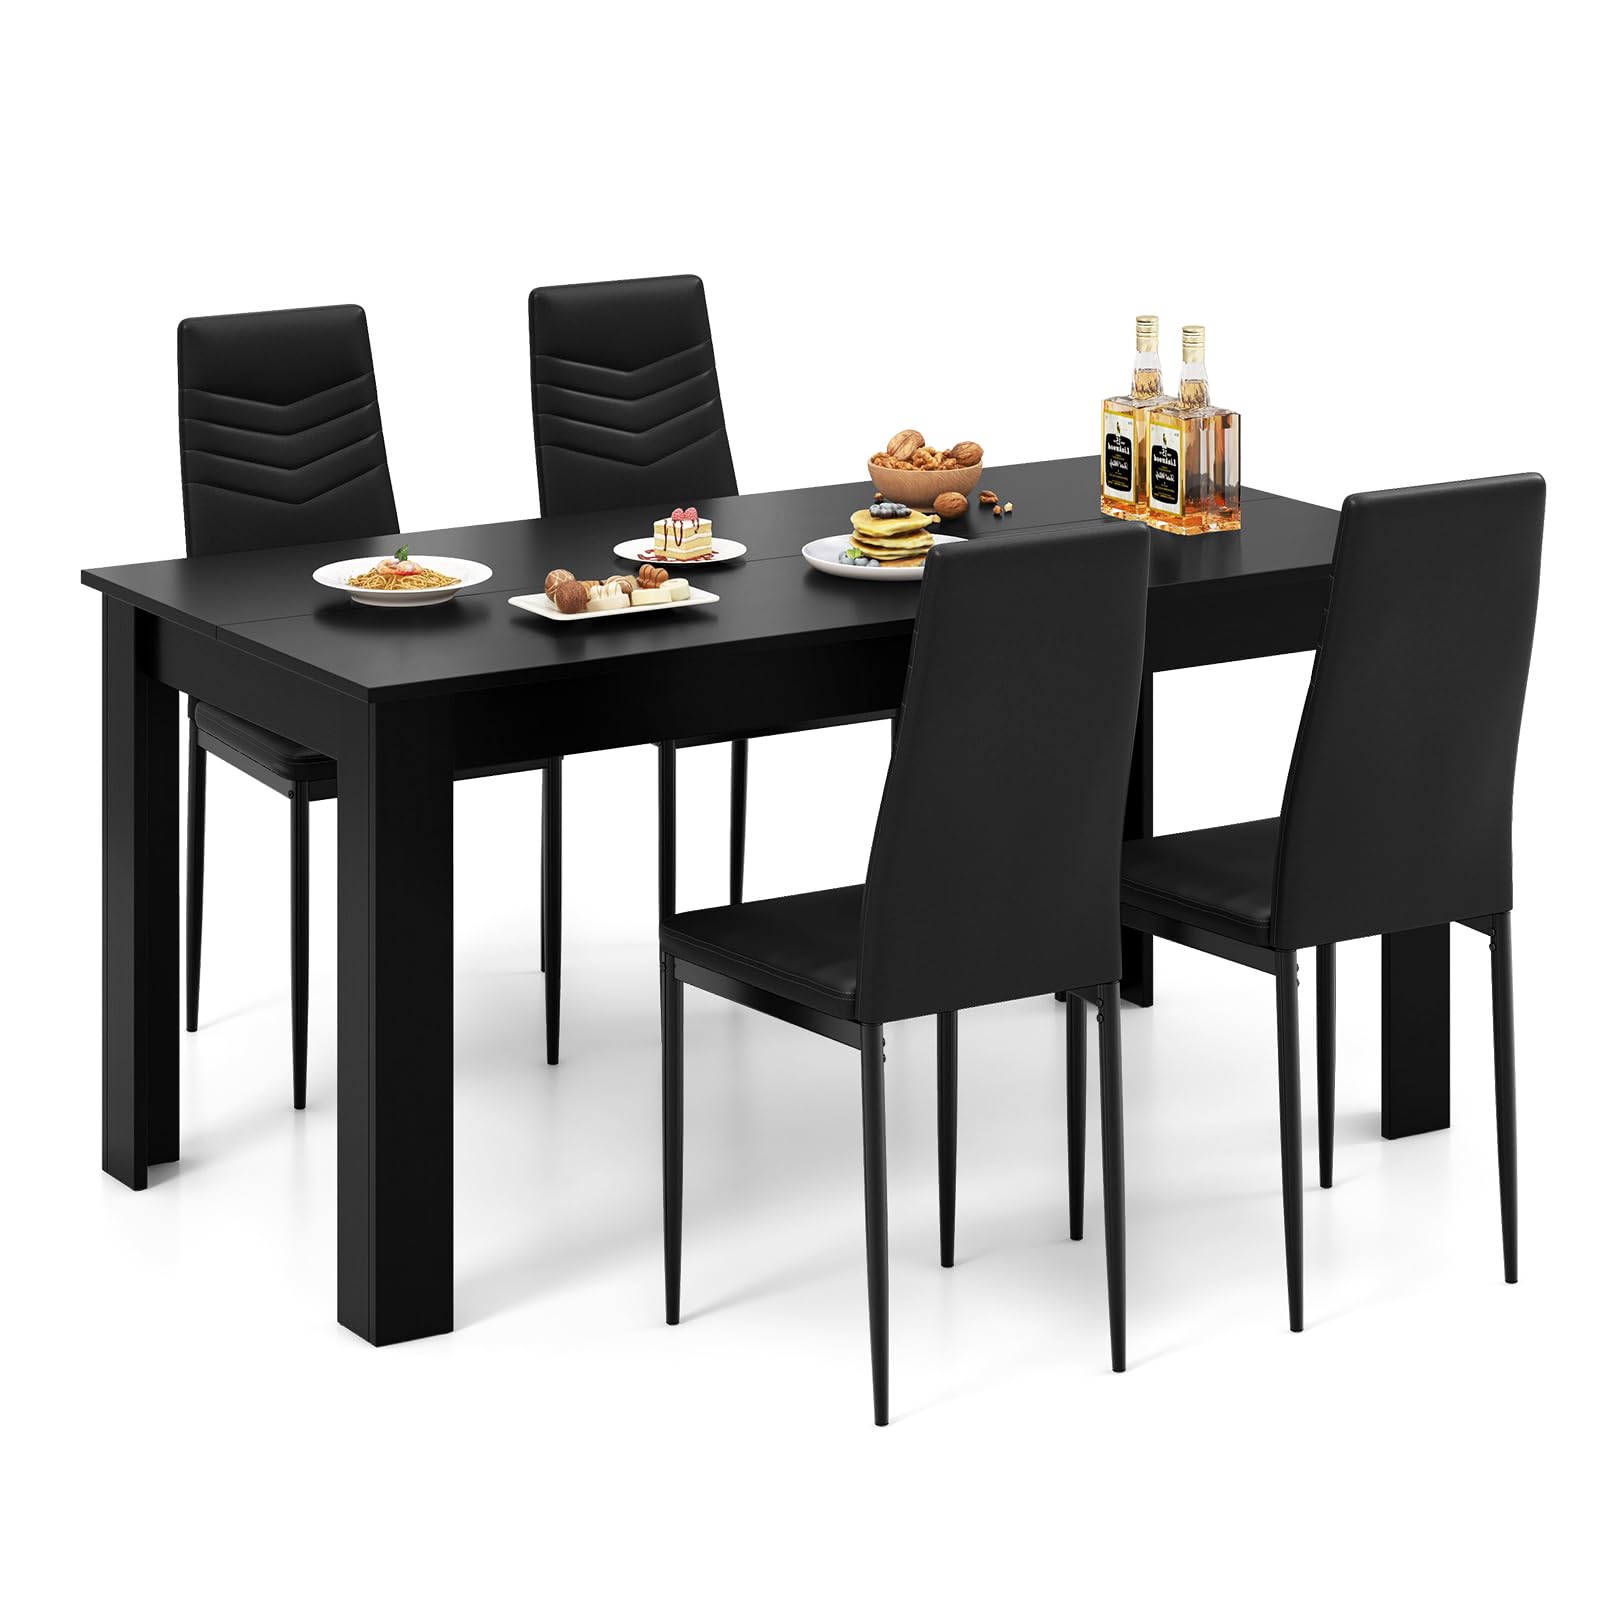 Giantex Dining Table Set for 4 or 8, Modern Rectangular Kitchen Table Set w/ PVC Leather Dining Chairs